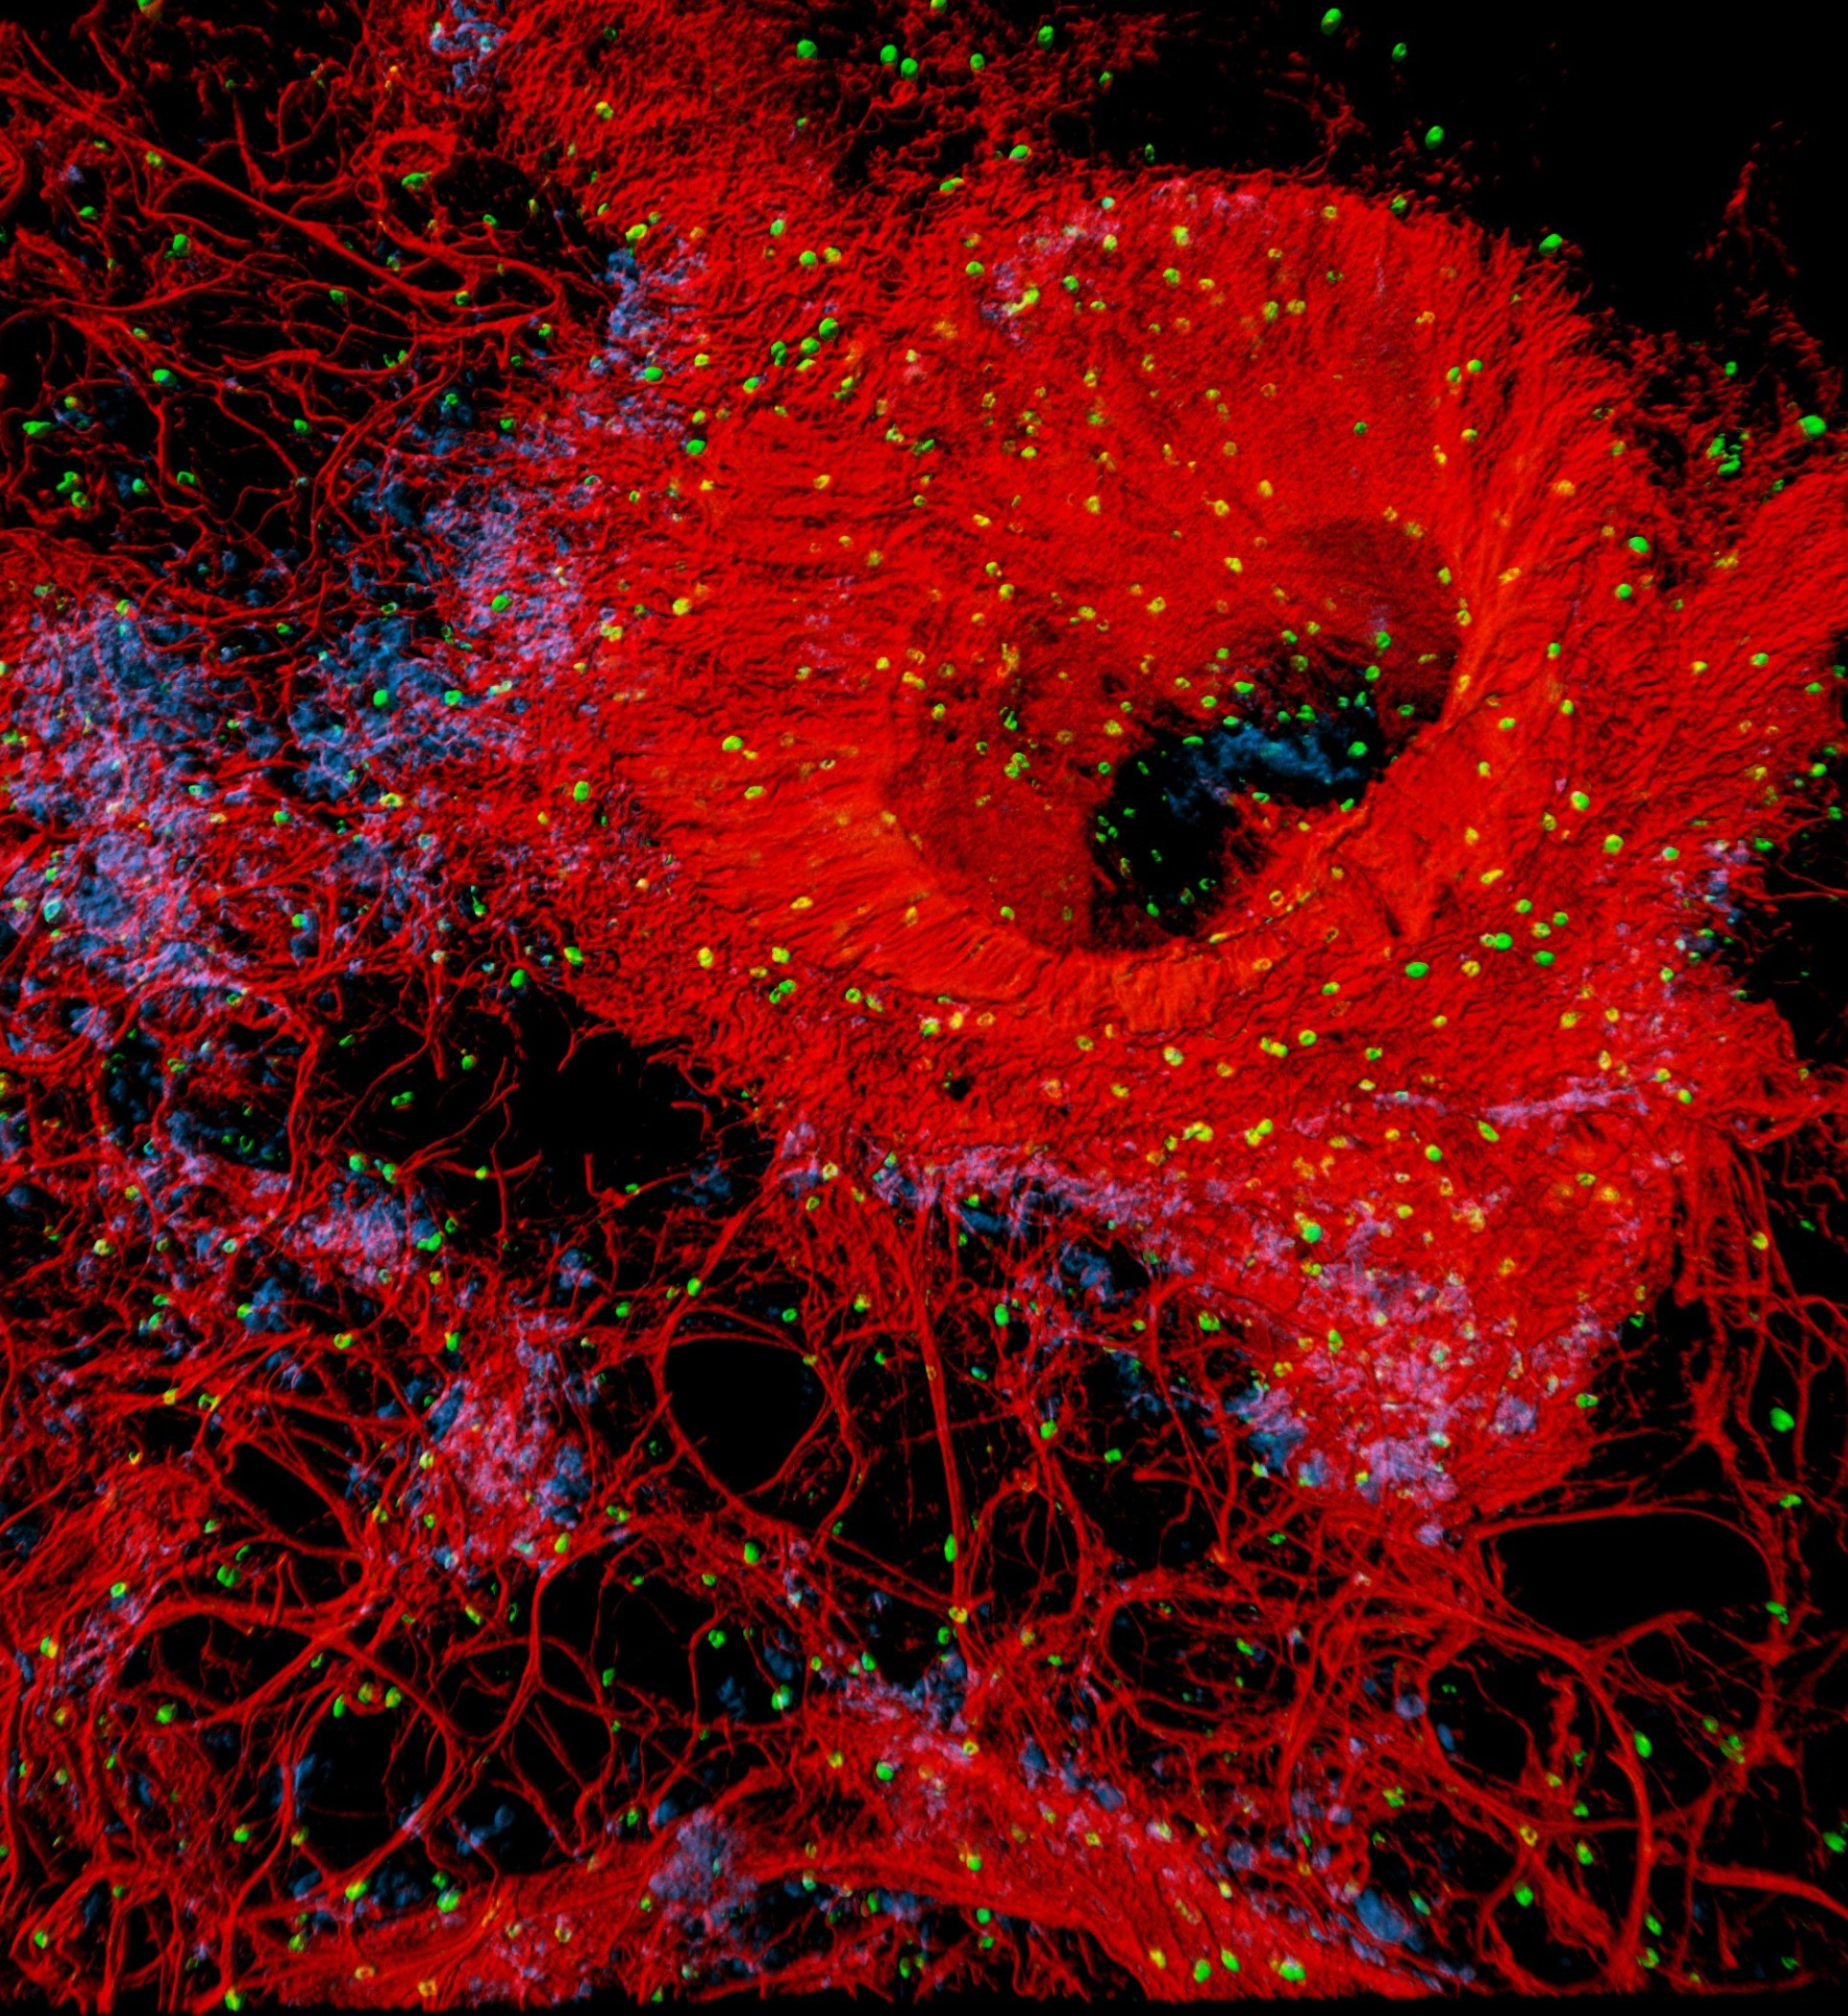 The image shows a small region of a human lung and its rich supply of blood vessels in red. The tiny green dots reveal immune cells called mast cells in the lungs and the blue dots are pericytes which are crucial cells for blood vessels to maintain their structure.  